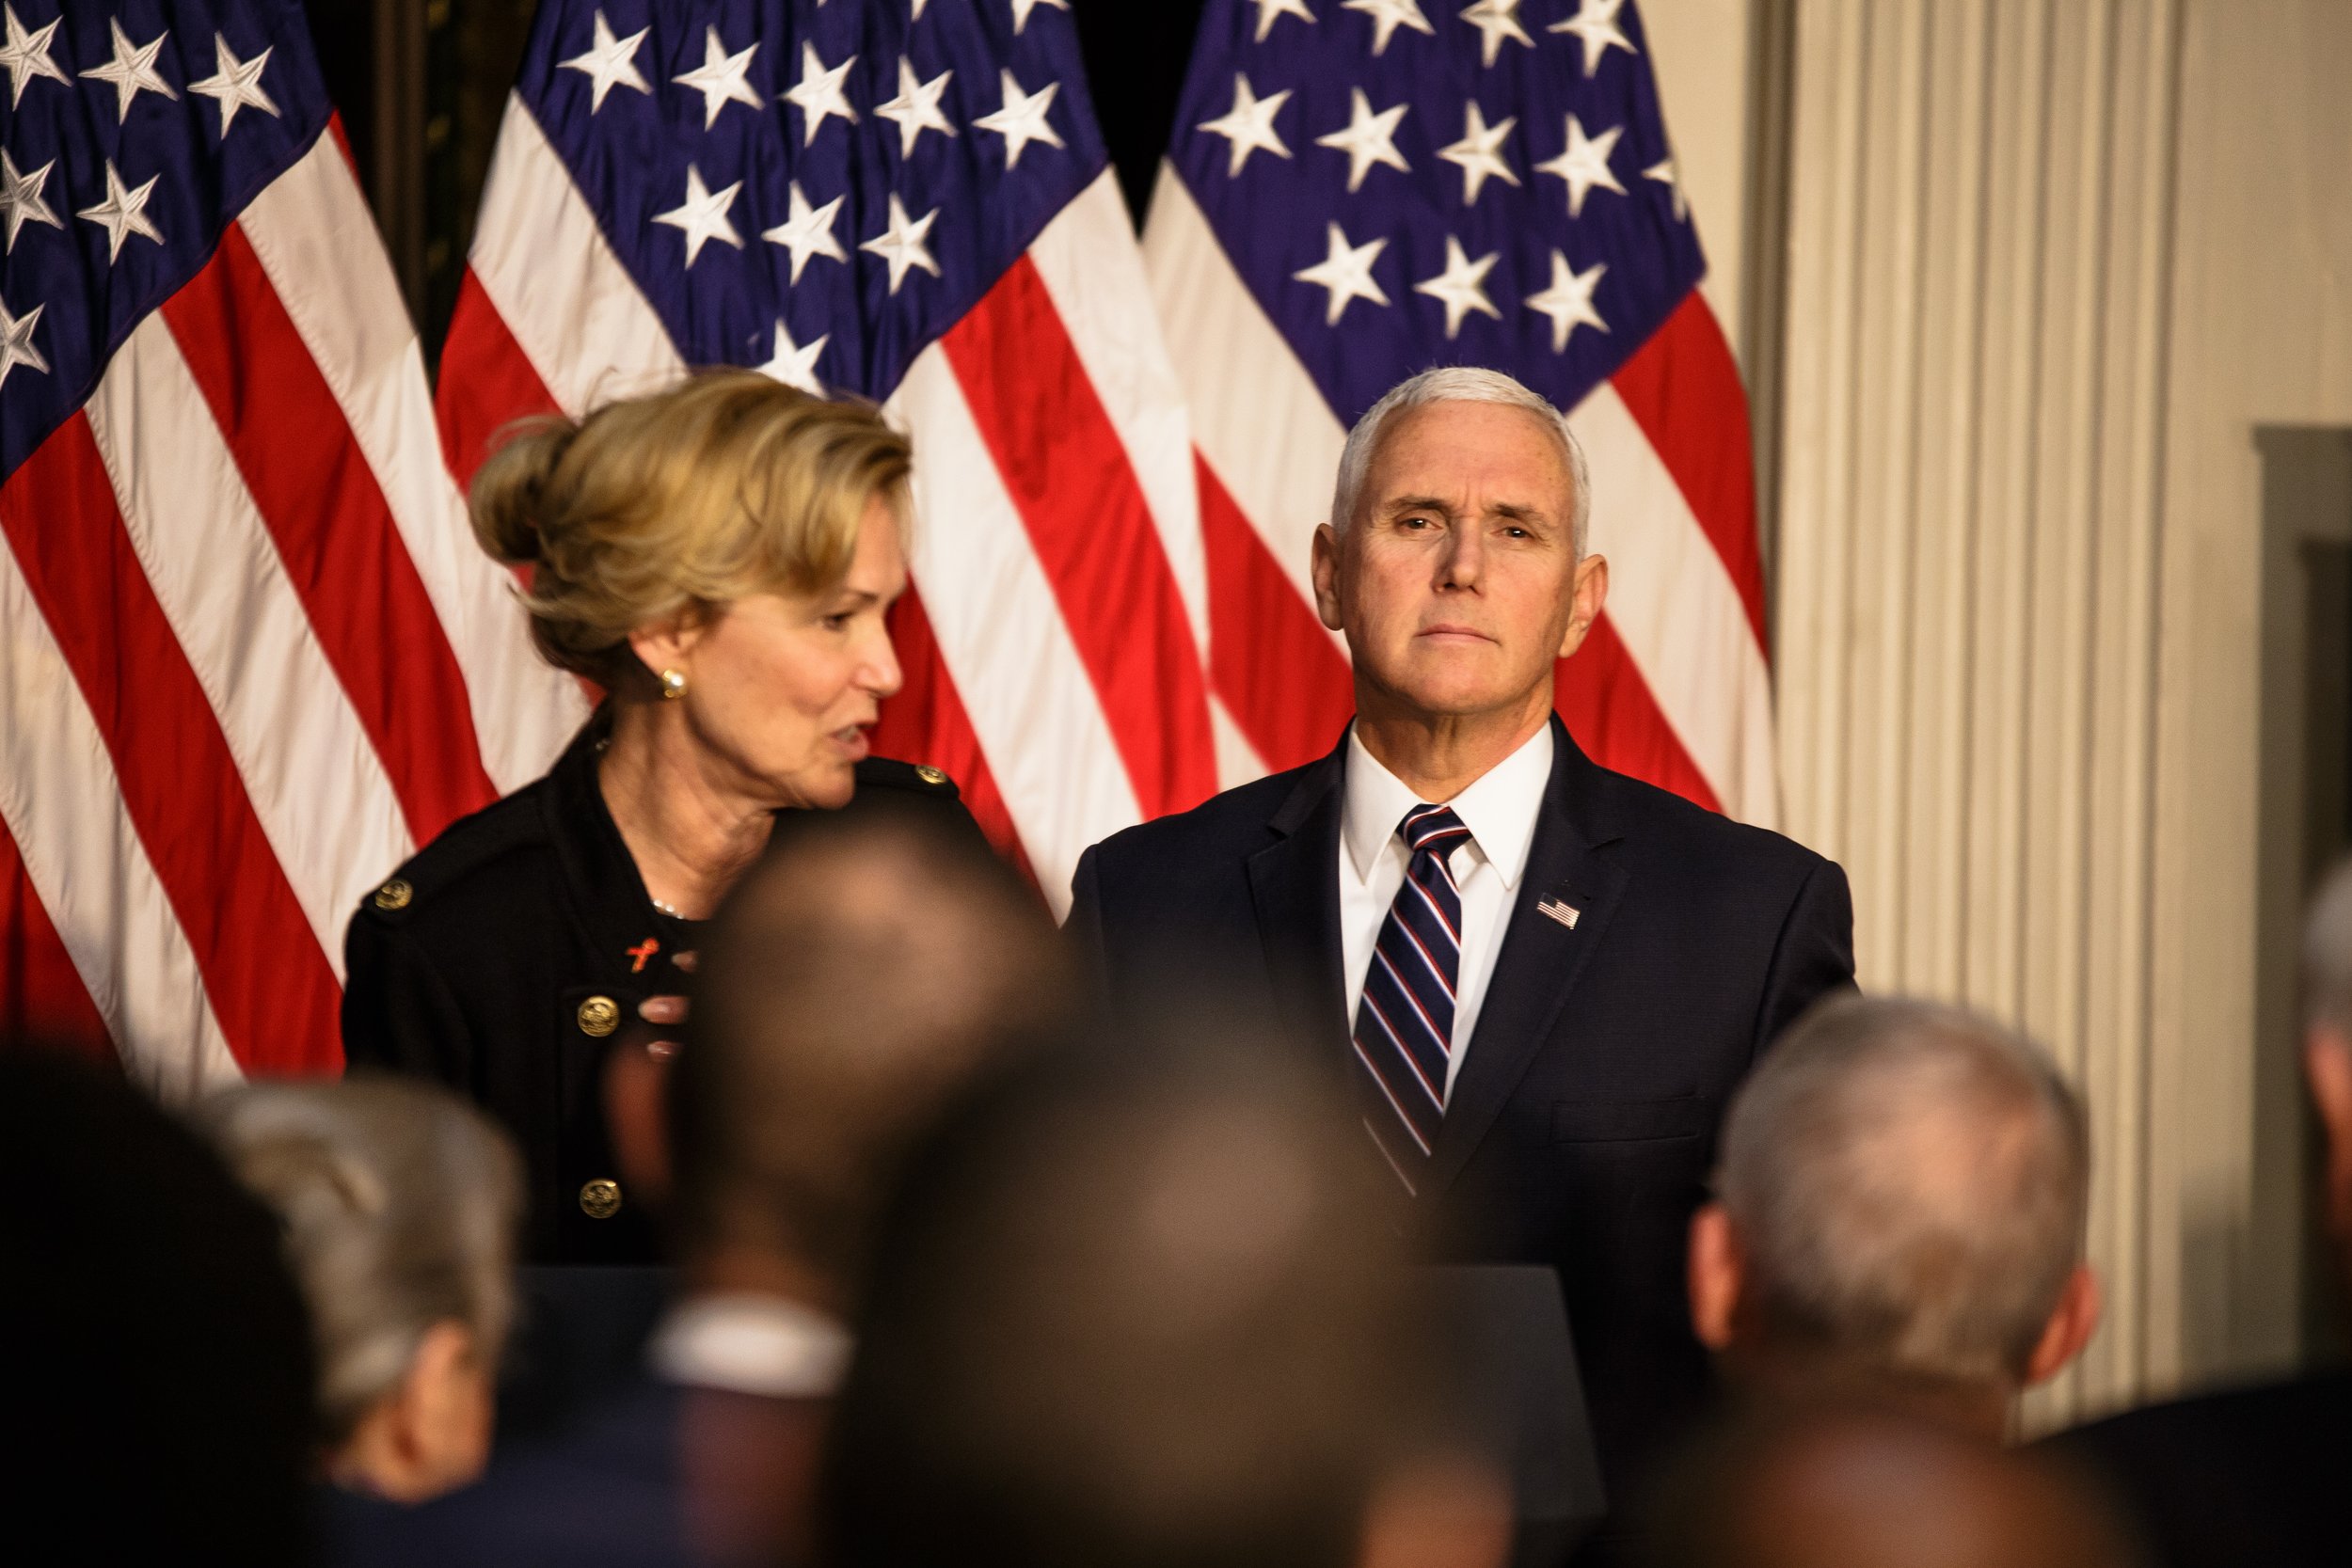  Vice President Mike Pence glances at the press before giving an address on World Aids Day in the Eisenhower Executive Office Building.    November 2018   